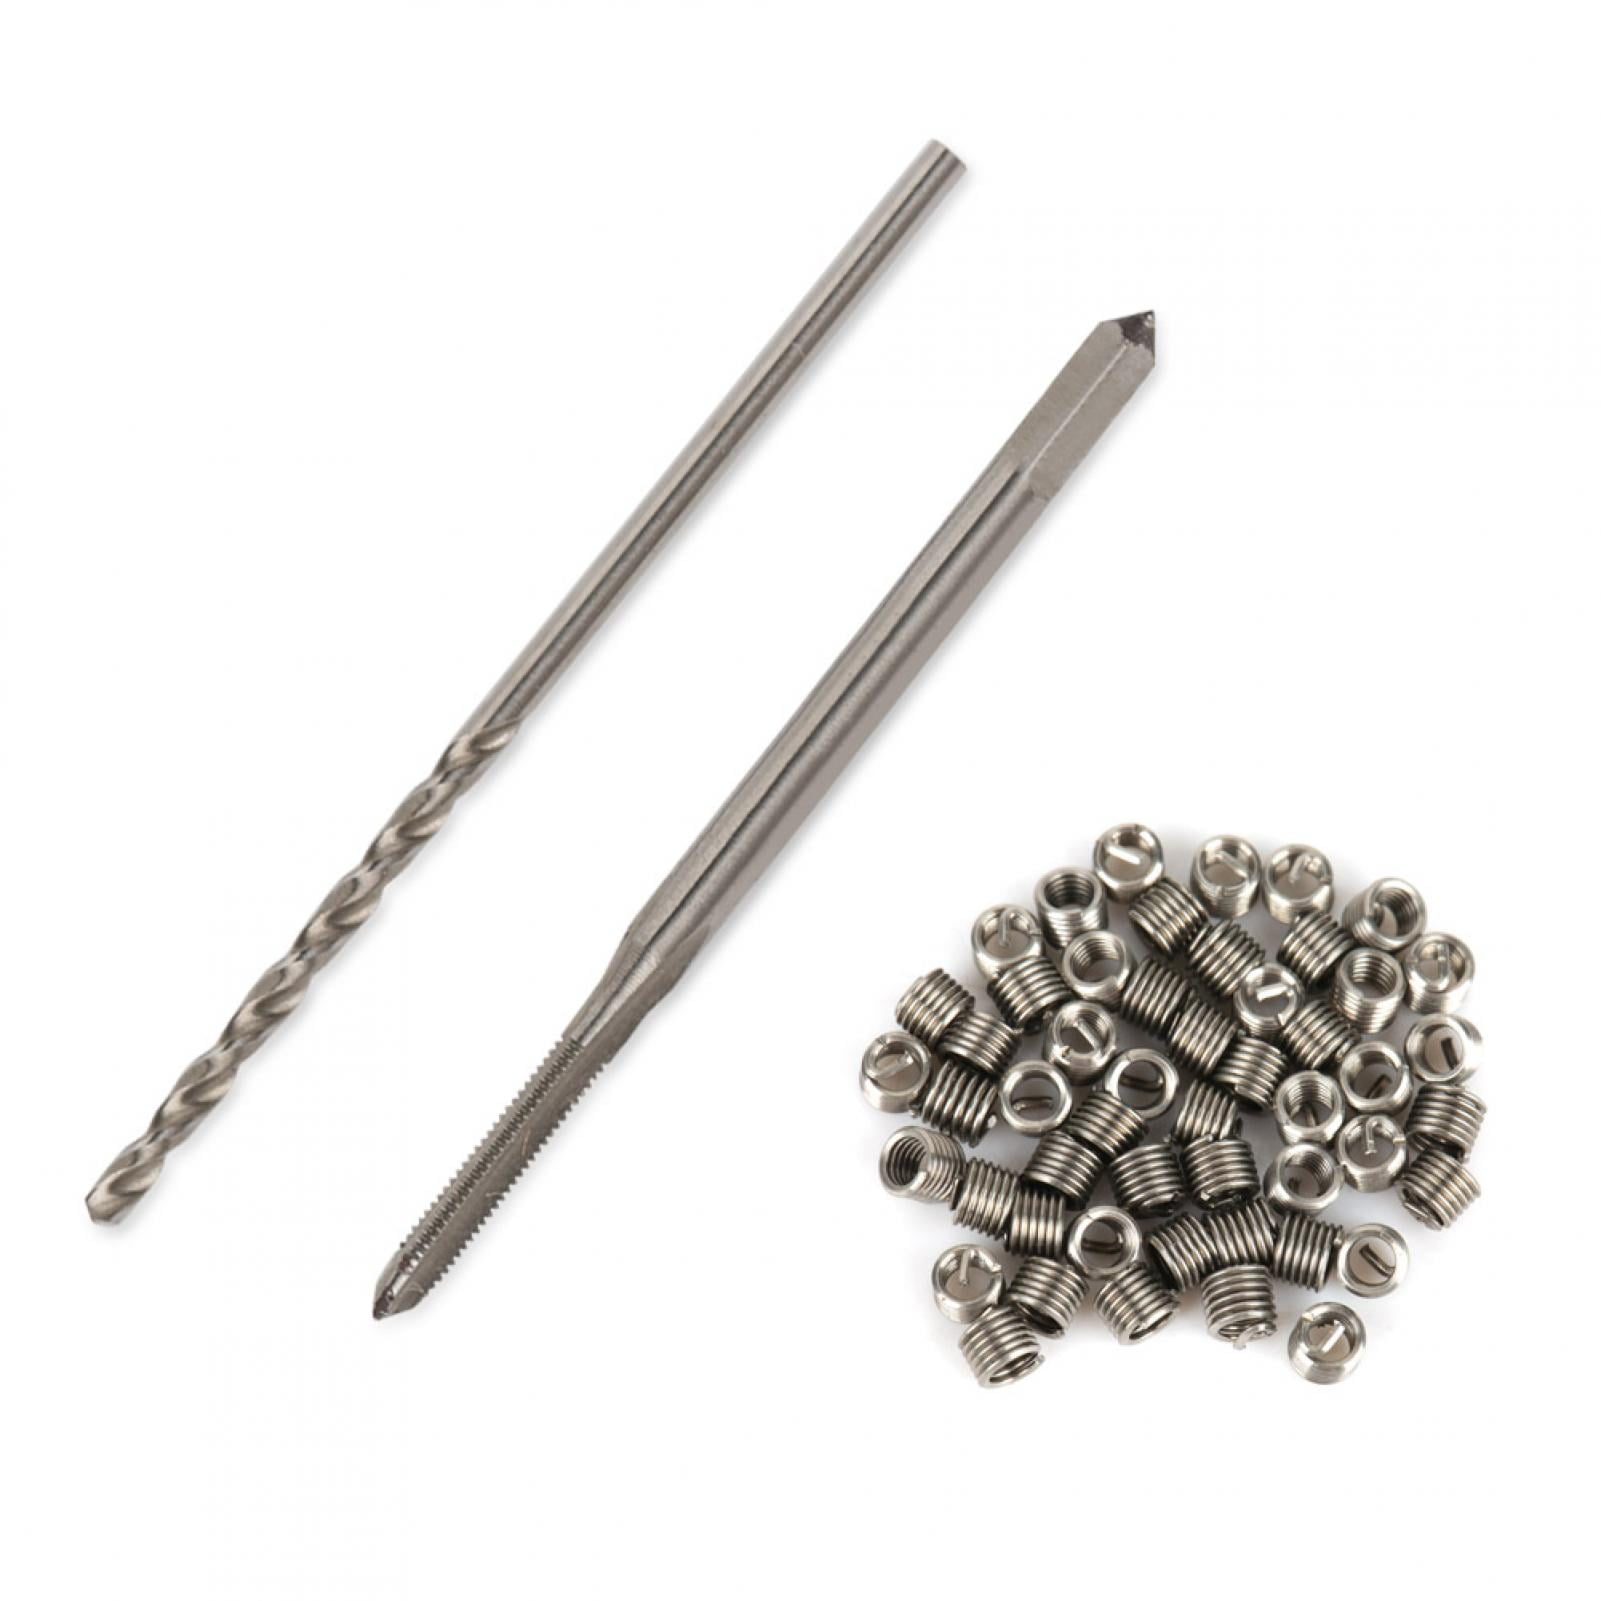 Wire Screw Repair Durable Stainless Steel M3 Aluminum for Steel Metal Threads Iron Wire Thread Inserts Assortment Kit